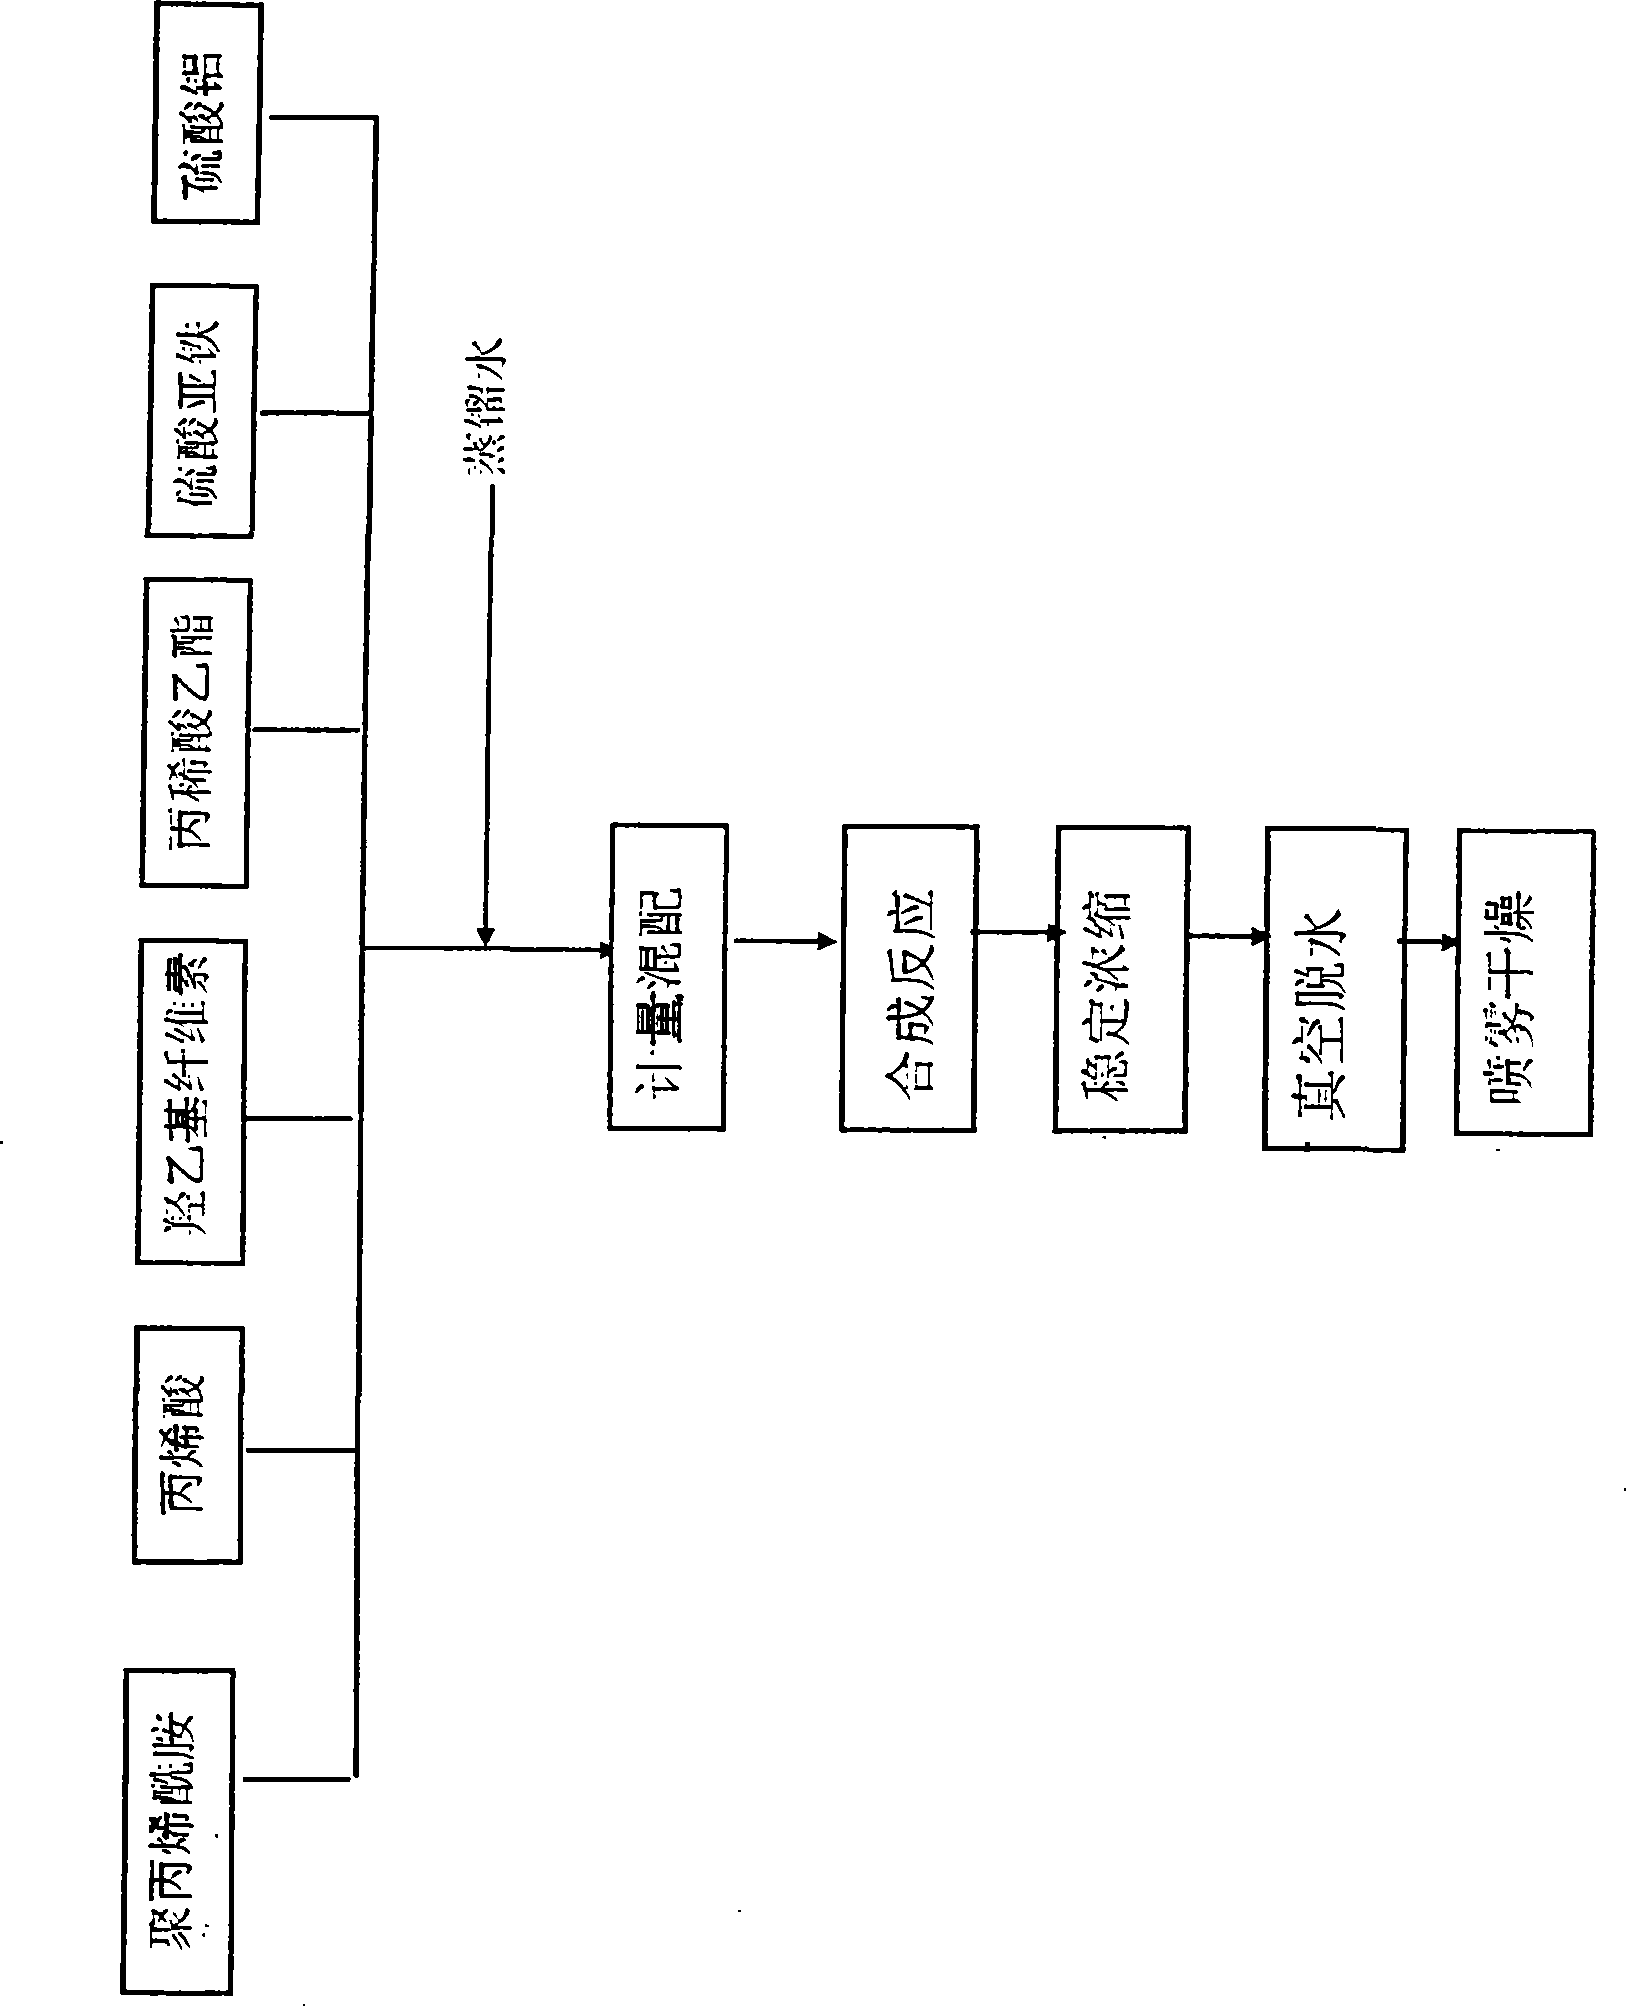 Compound high-efficiency flocculating agent